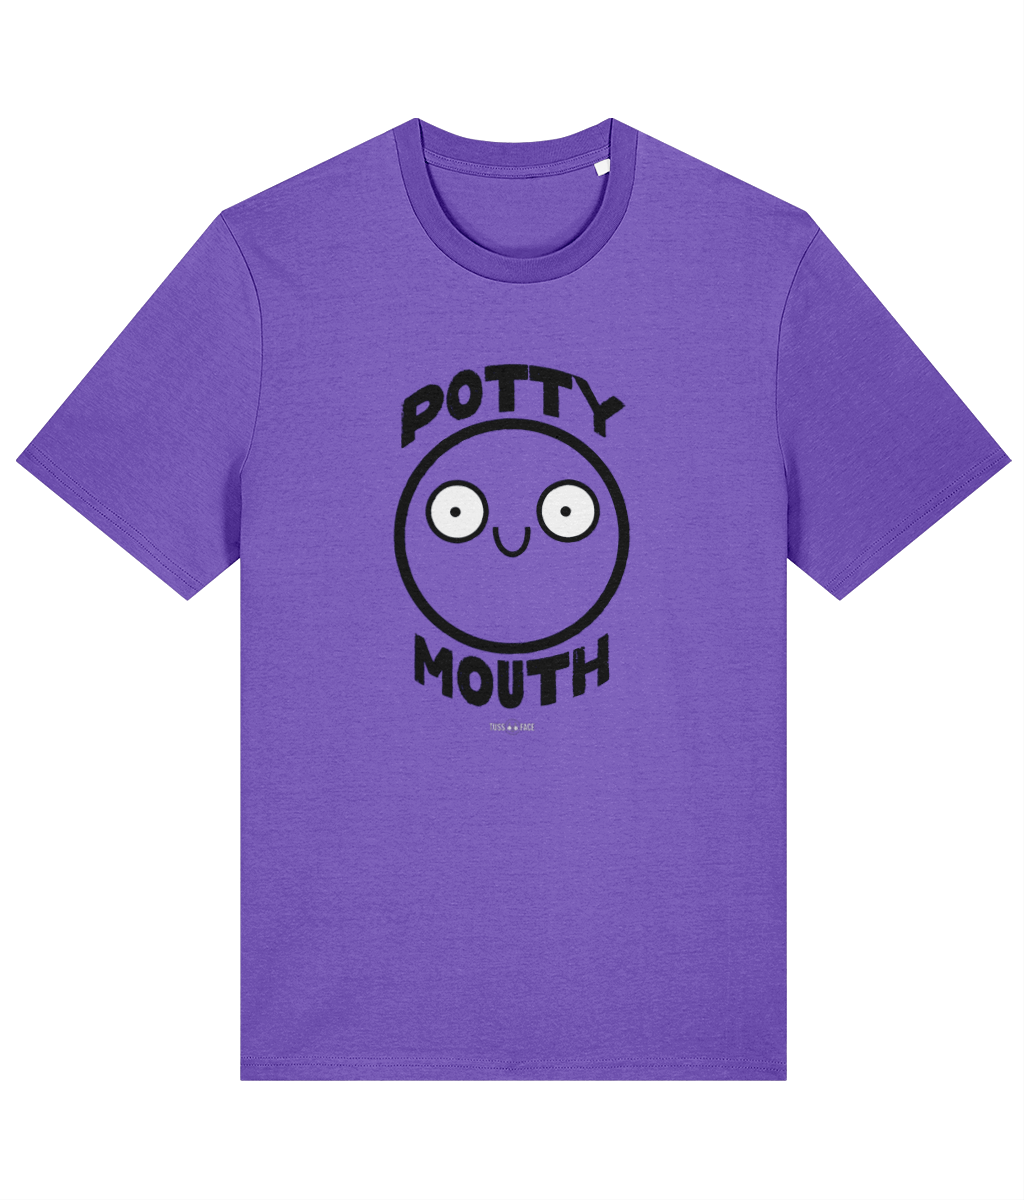 Potty Mouth - Tussface T-shirt